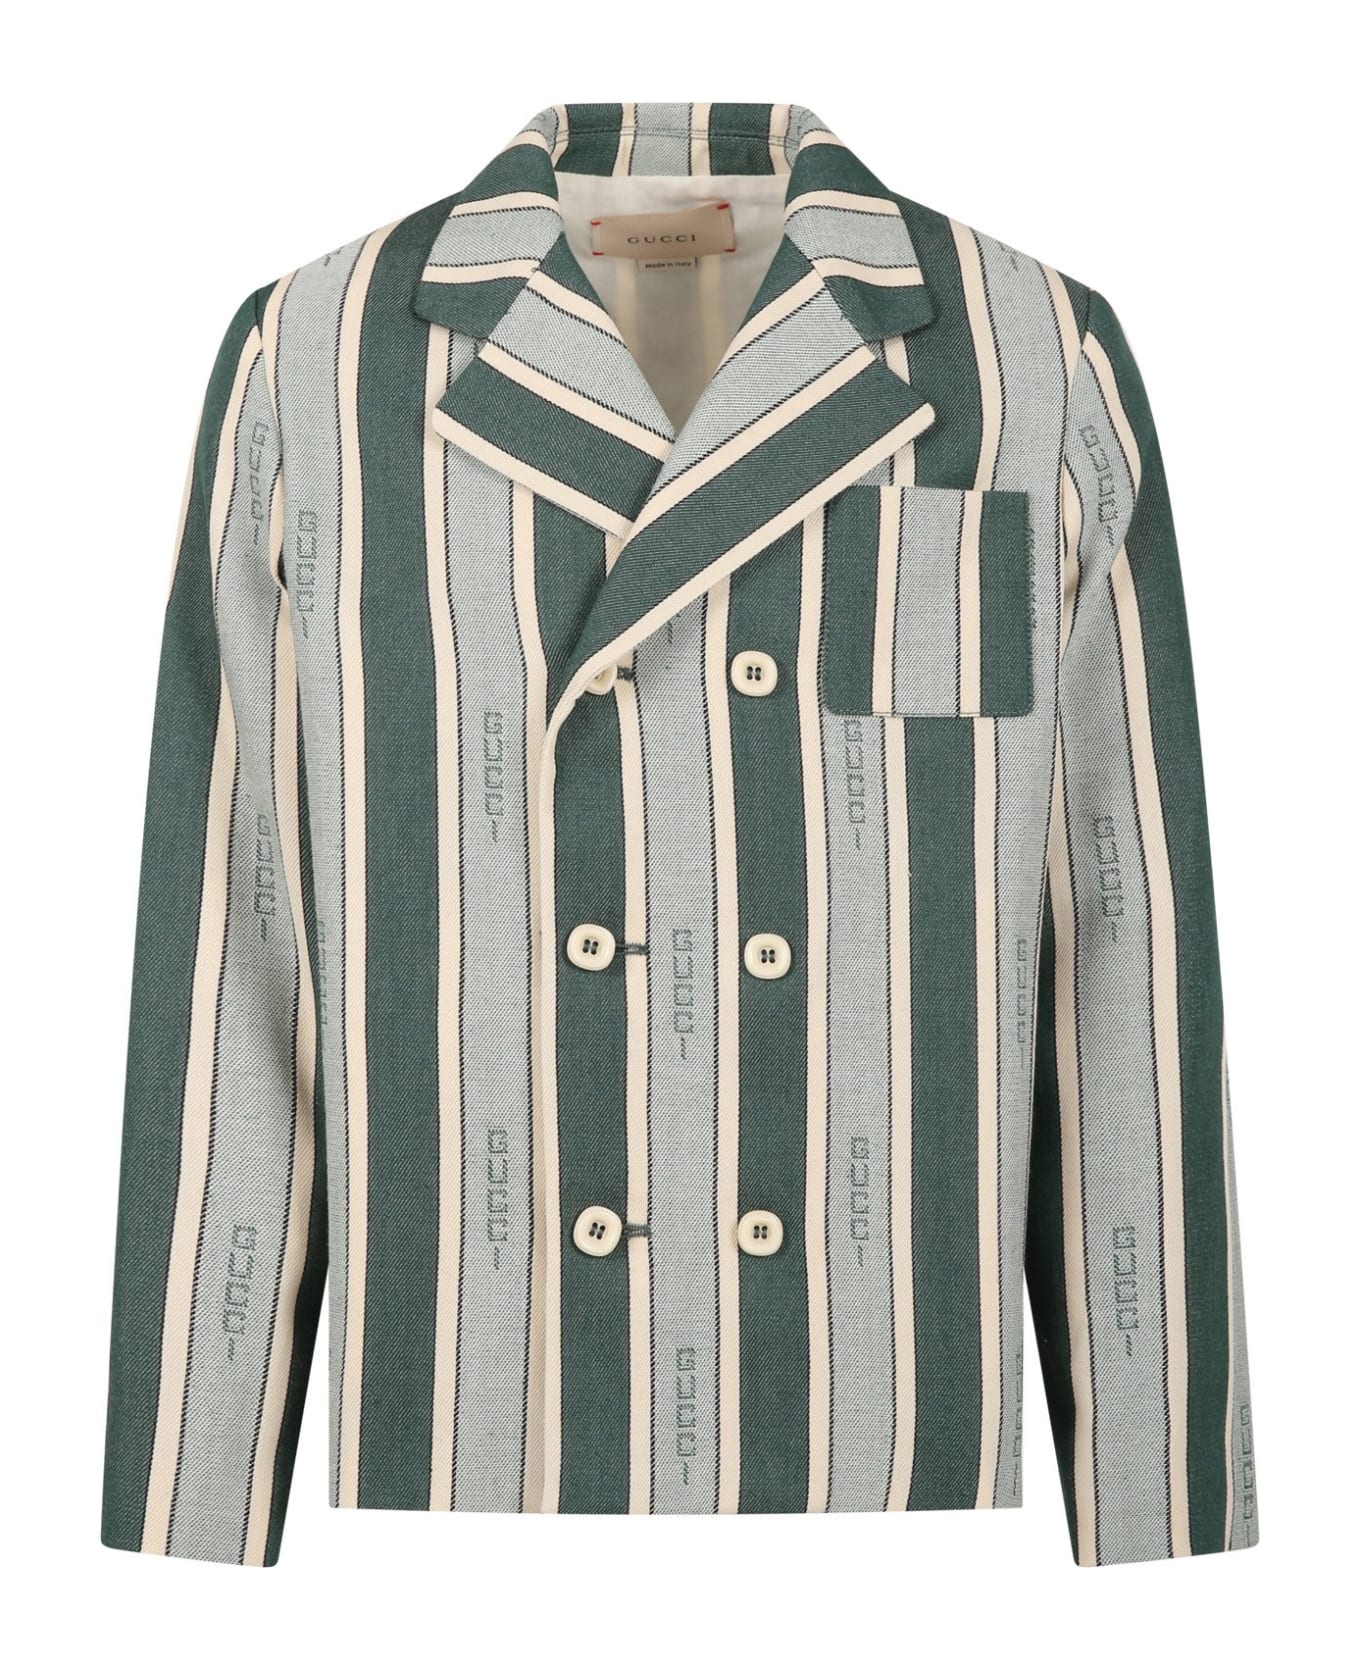 Gucci Green And Ivory Jacket For Boy With "gucci" Writing - Green